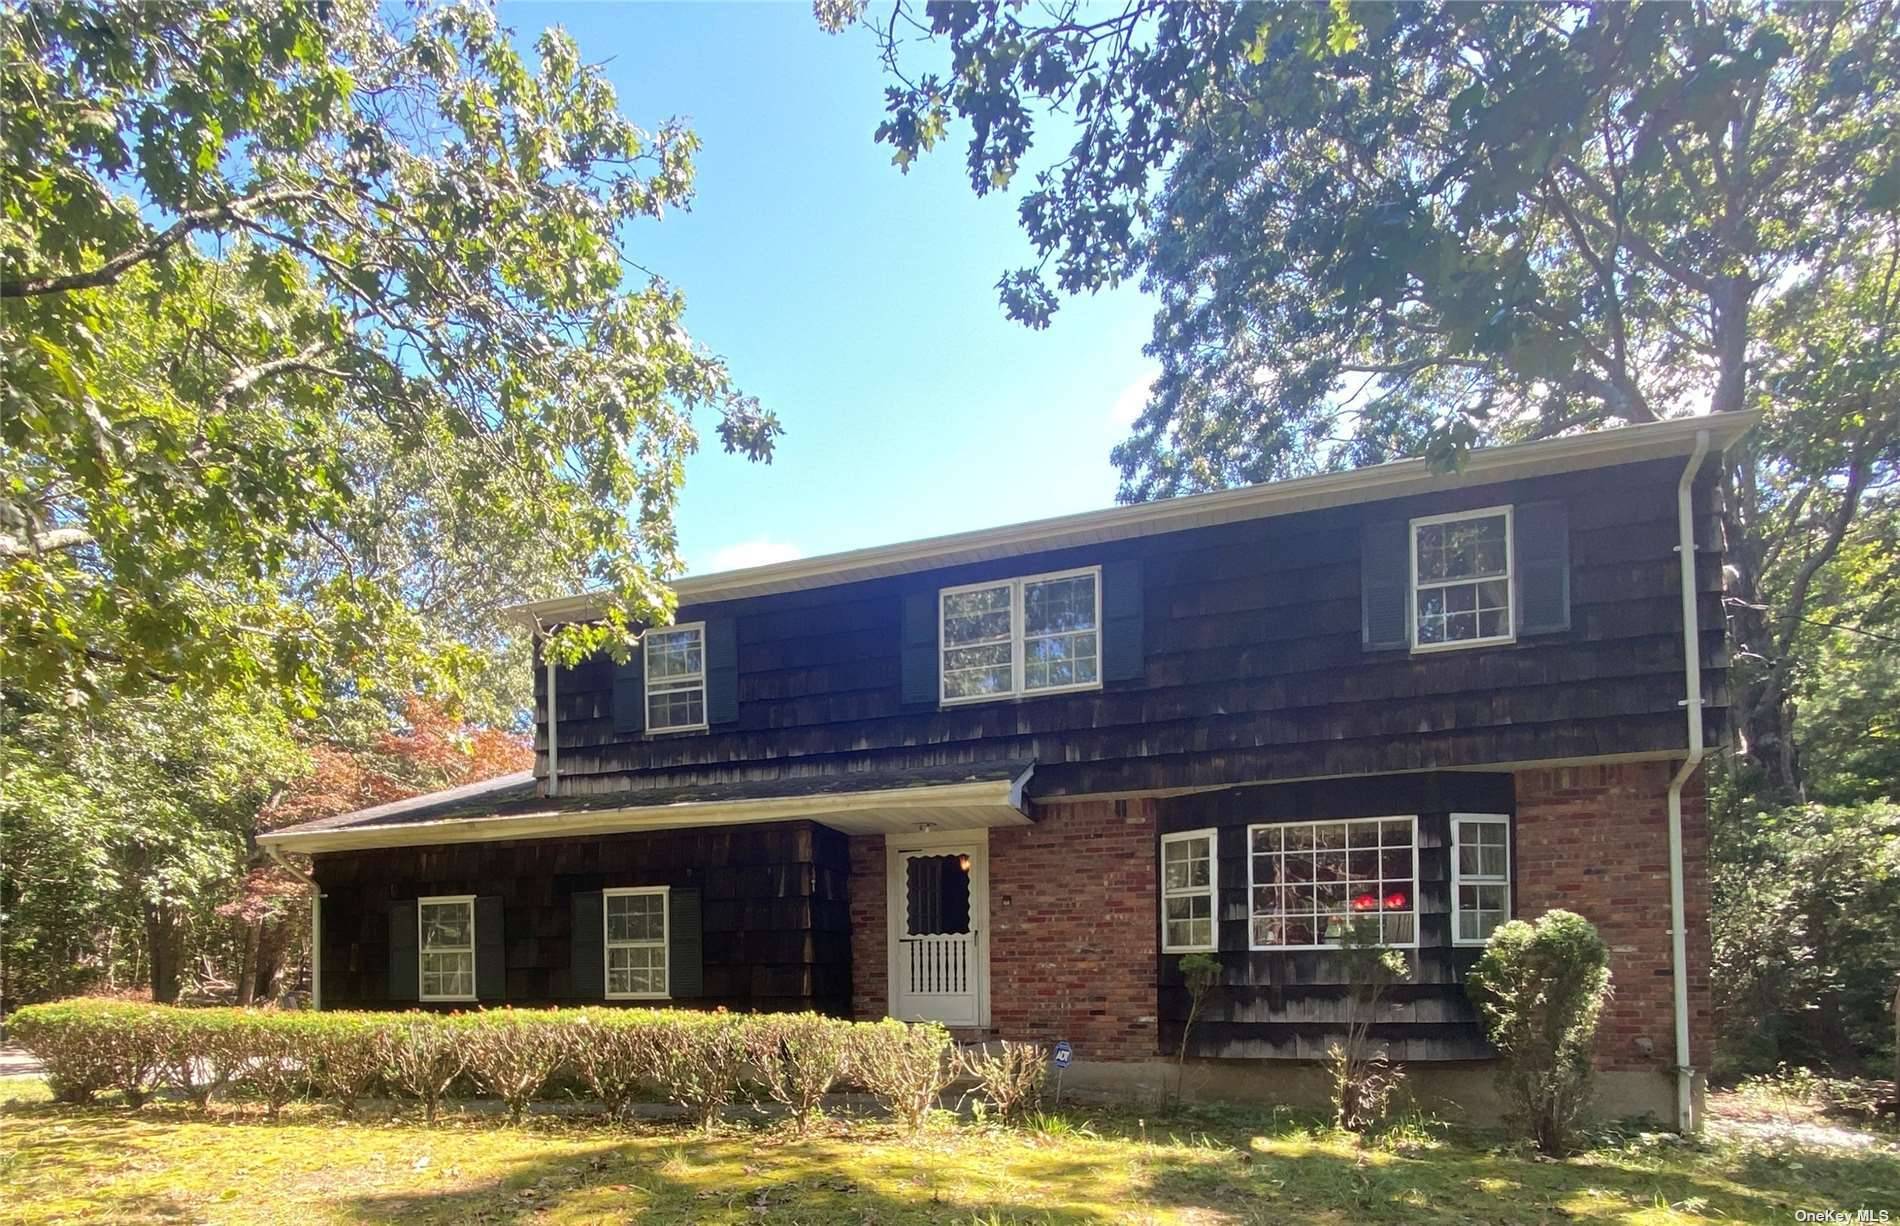 Quality built custom 1970 colonial on a wooded acre in Manorville.